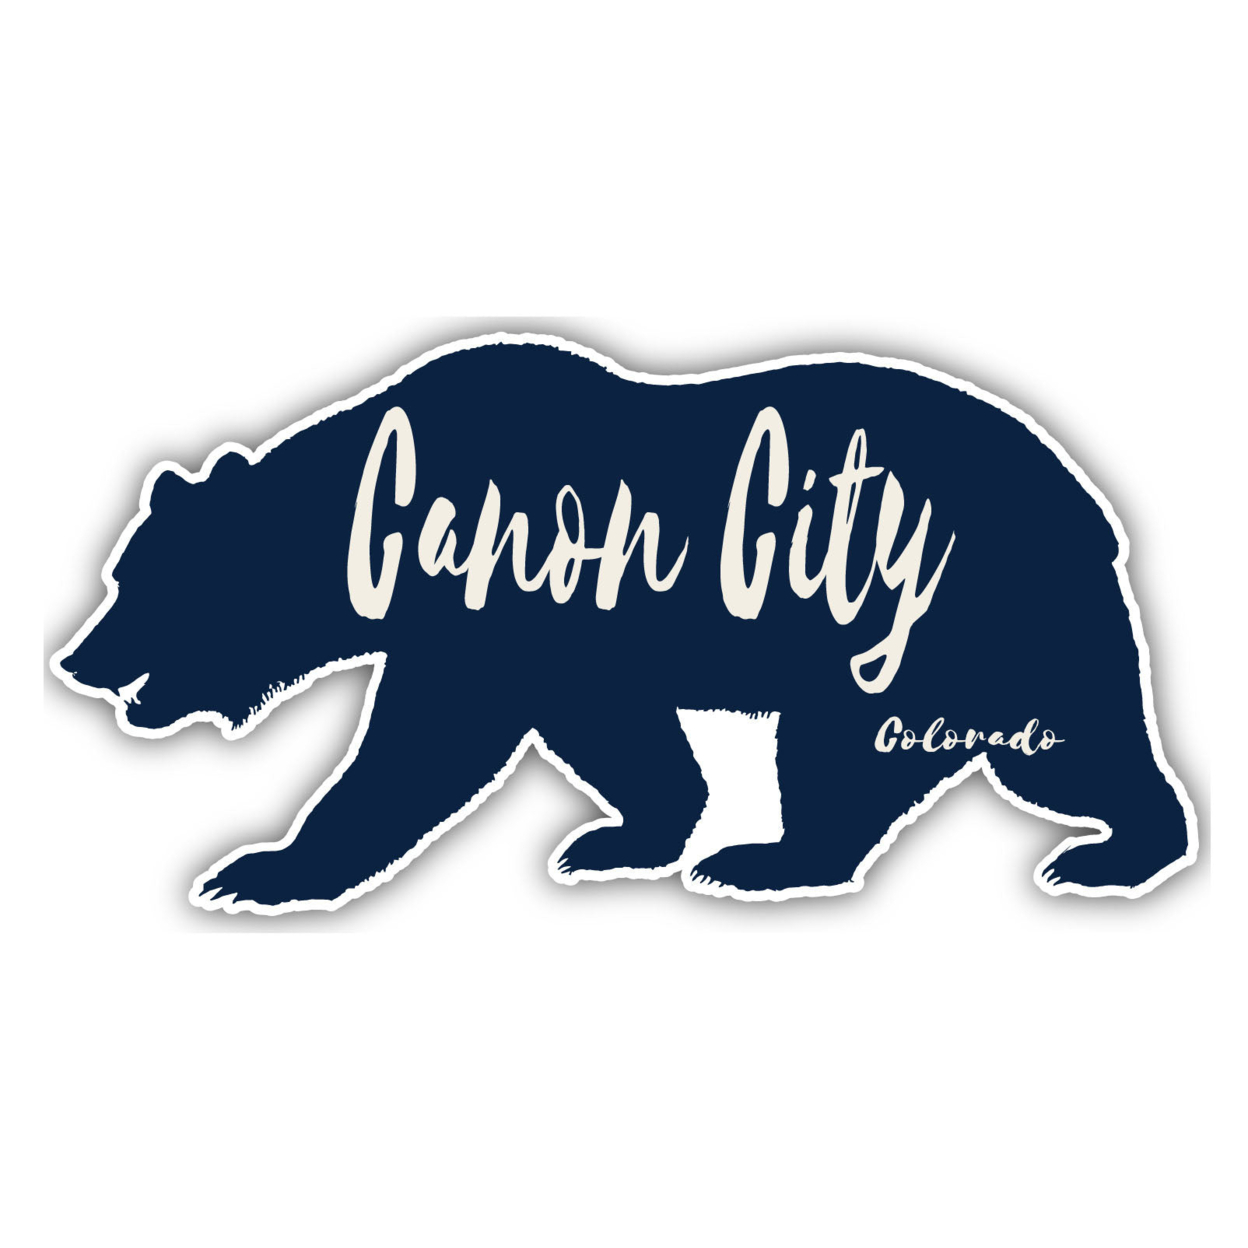 Canon City Colorado Souvenir Decorative Stickers (Choose Theme And Size) - 4-Pack, 2-Inch, Camp Life